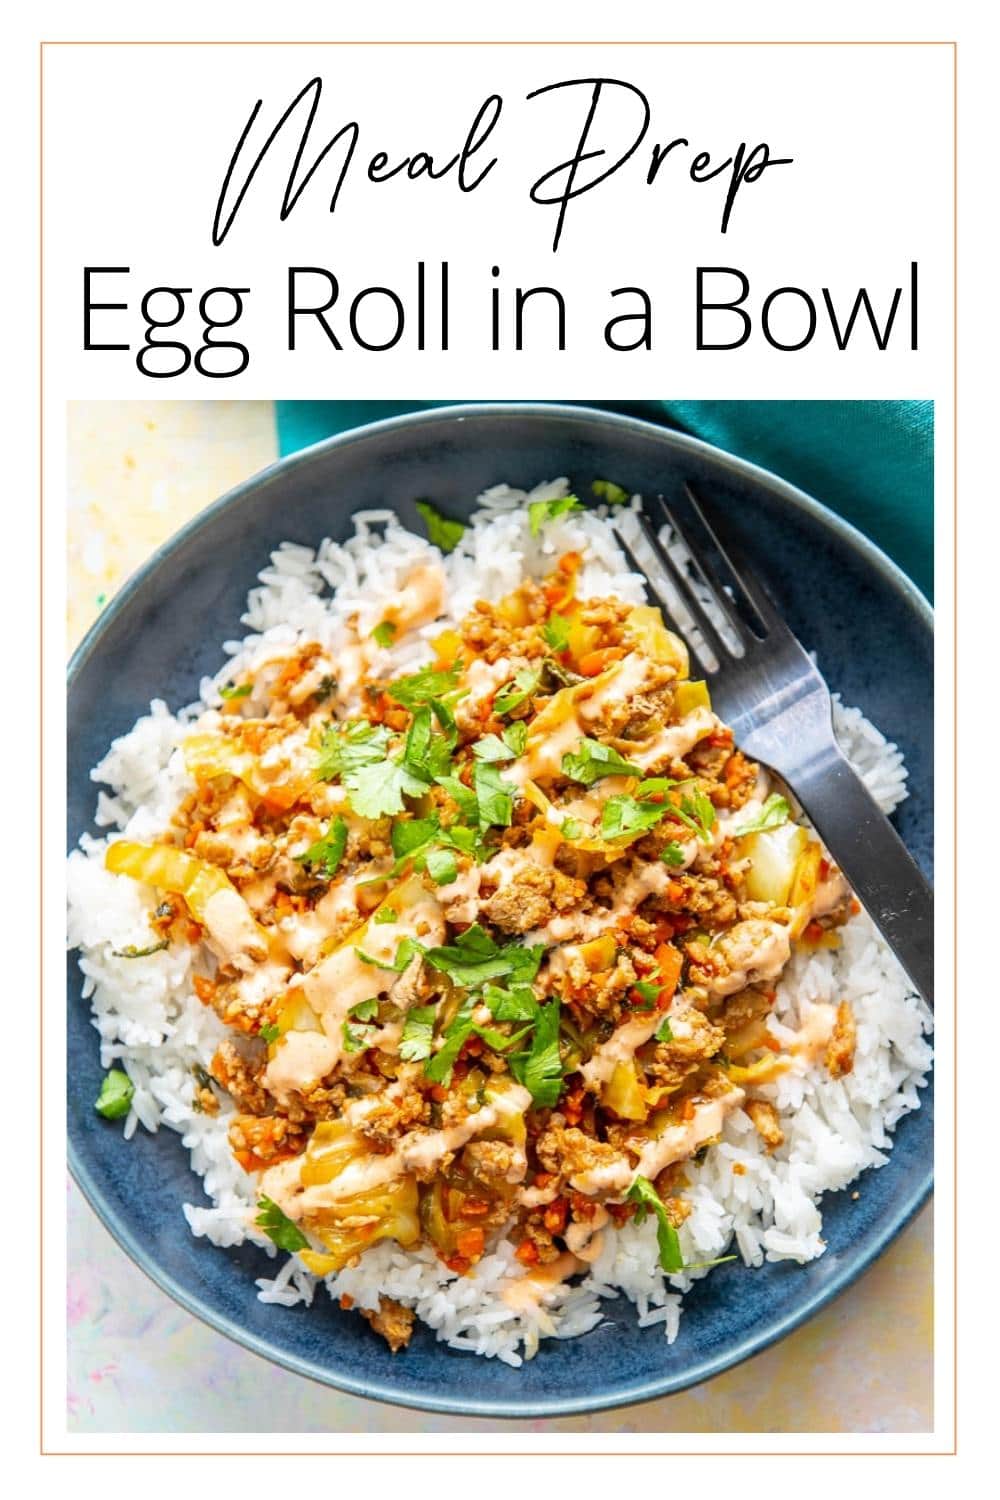 Meal Prep Egg Roll in a Bowl - Garnished Plate